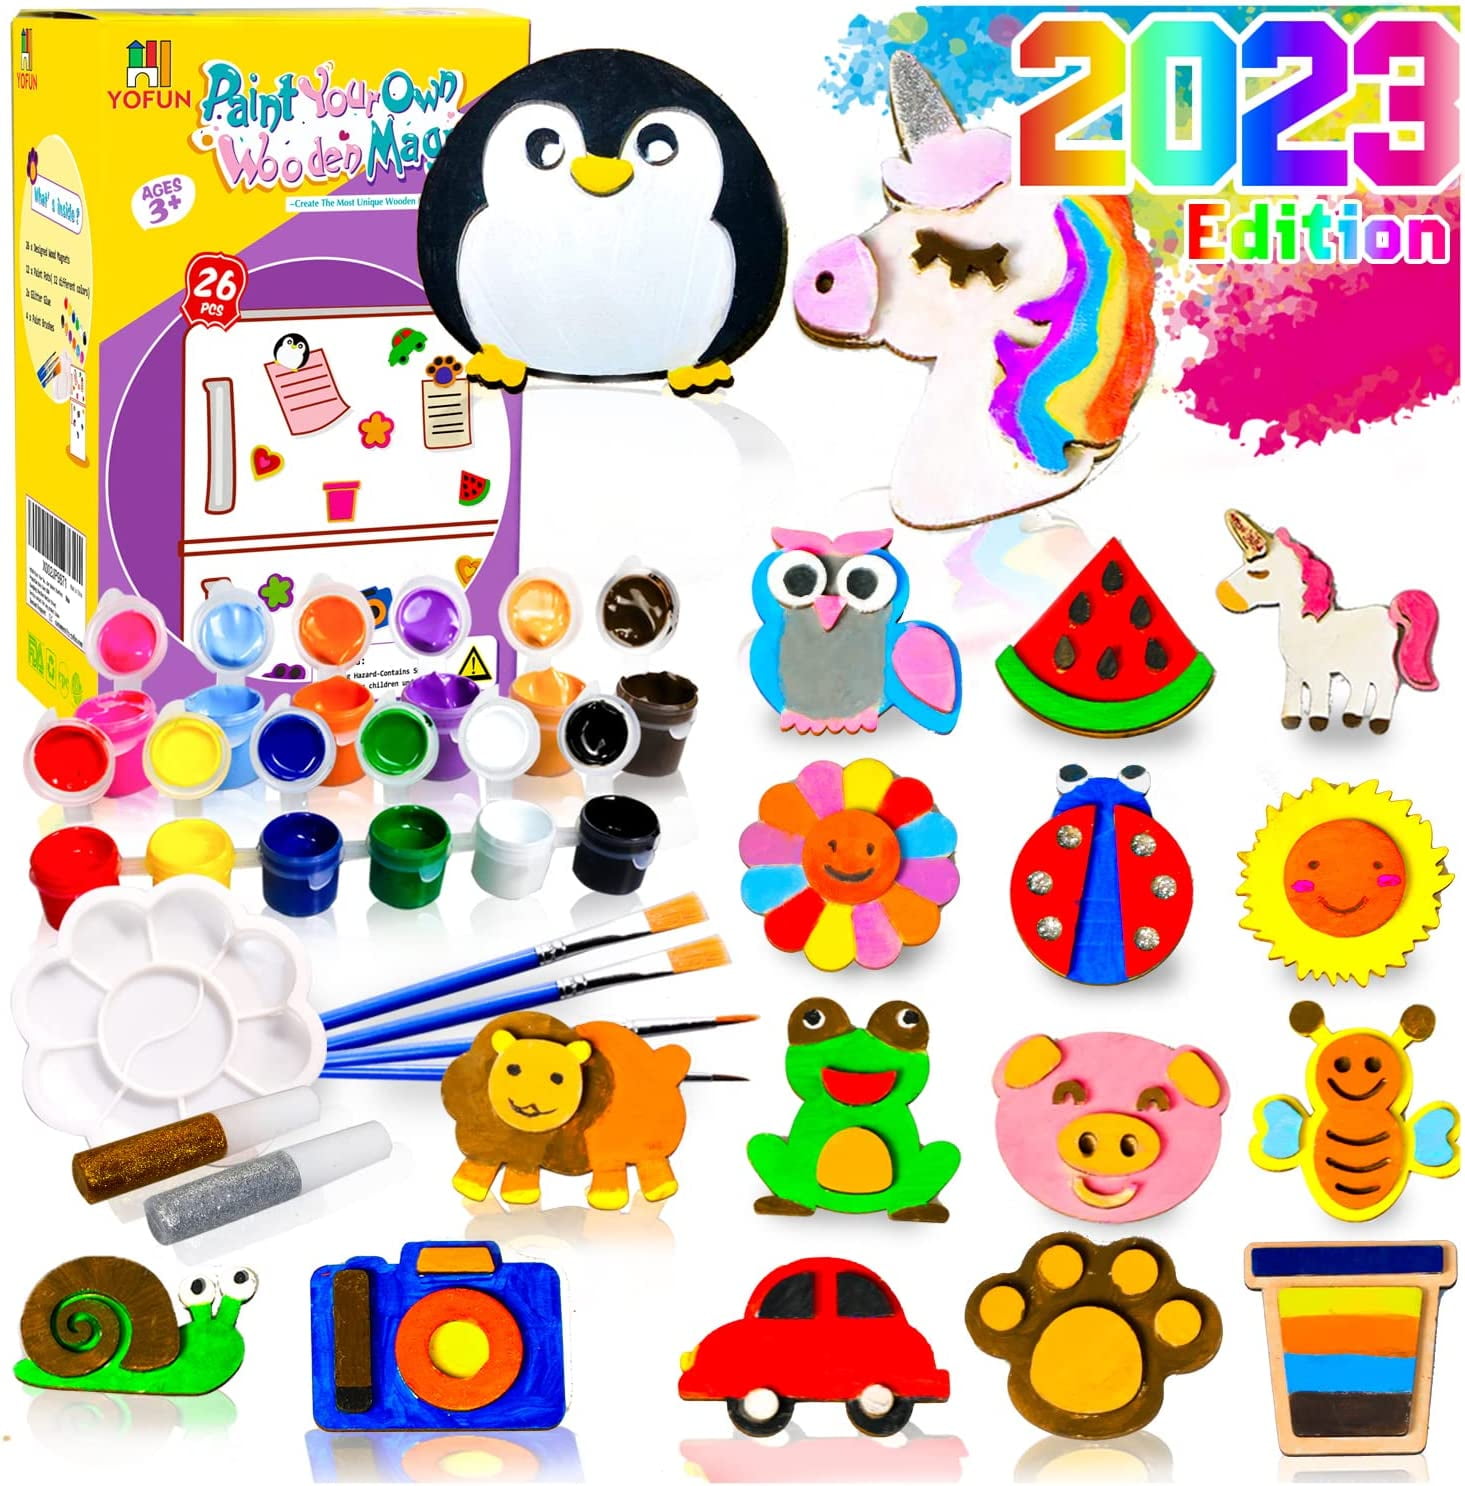  Sculpd Kids Painting Kit, Paint Craft Set for Kids Age 7+,  Includes 5 Colour Paint Set, Paintbrushes, Magnetic Picture Frame, 2  Canvases, Paint Palette, Additional Art Supplies and Free Guidebook